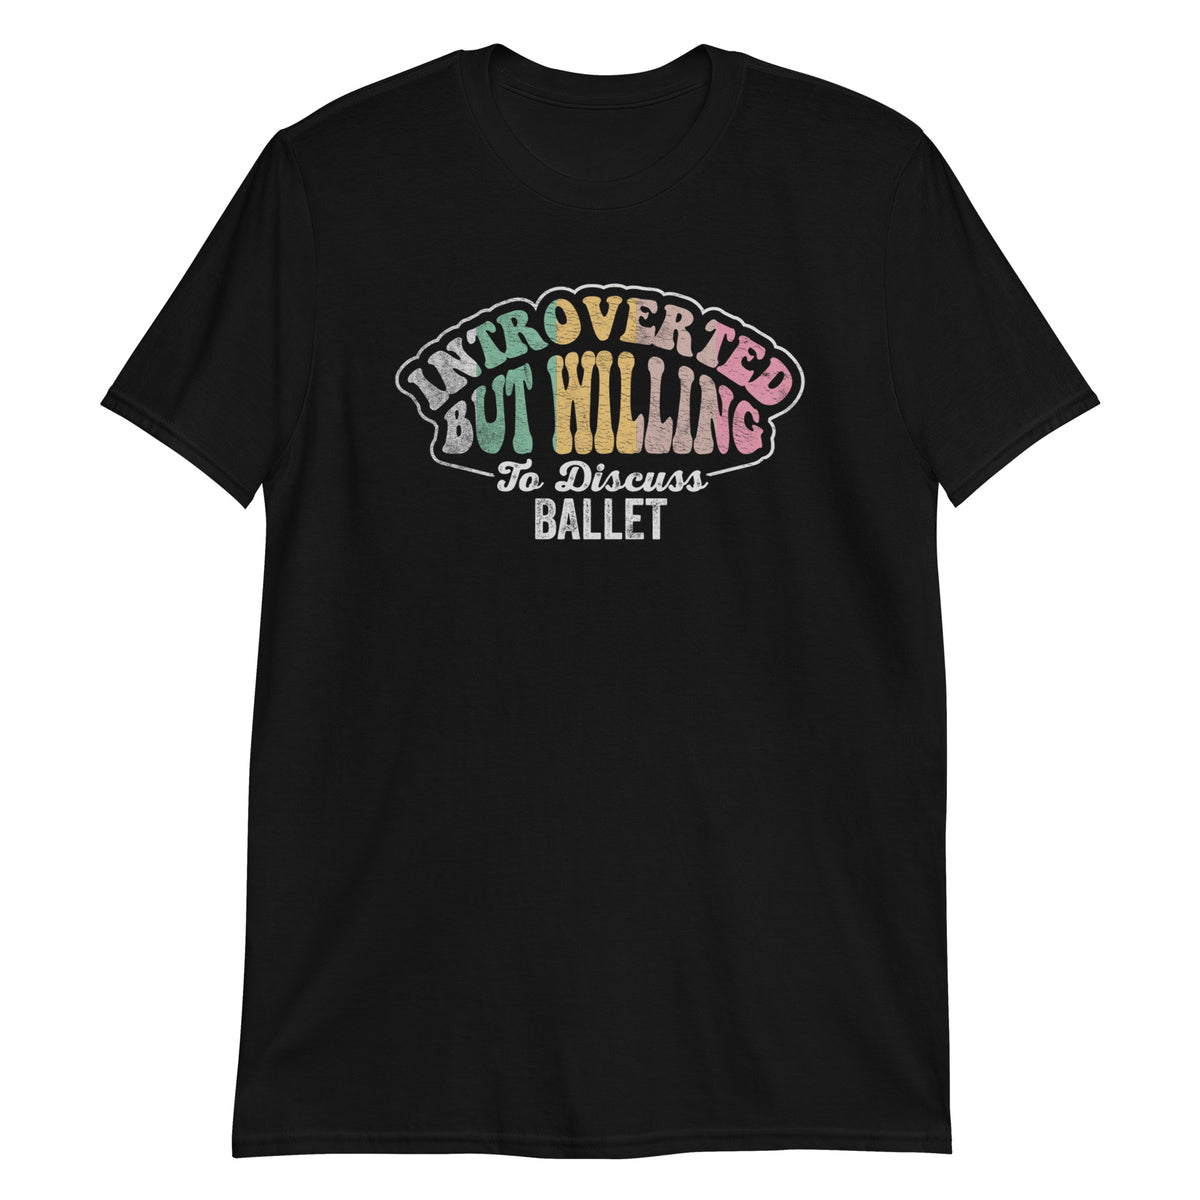 Introverted But Willing To Discuss Ballet T-Shirt